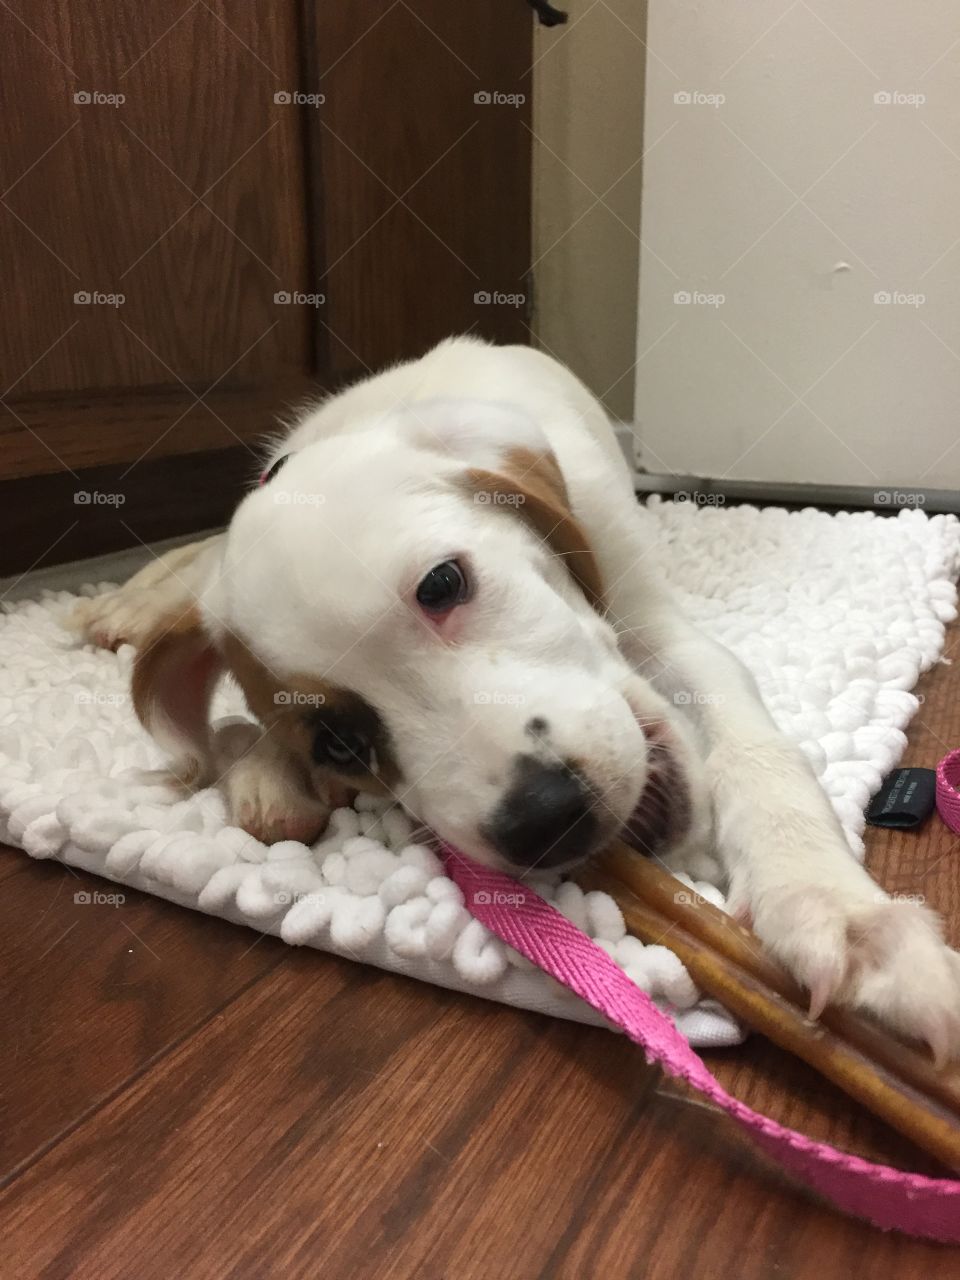 Maggie Mae chewing on a stick in the bathroom as a little puppy.